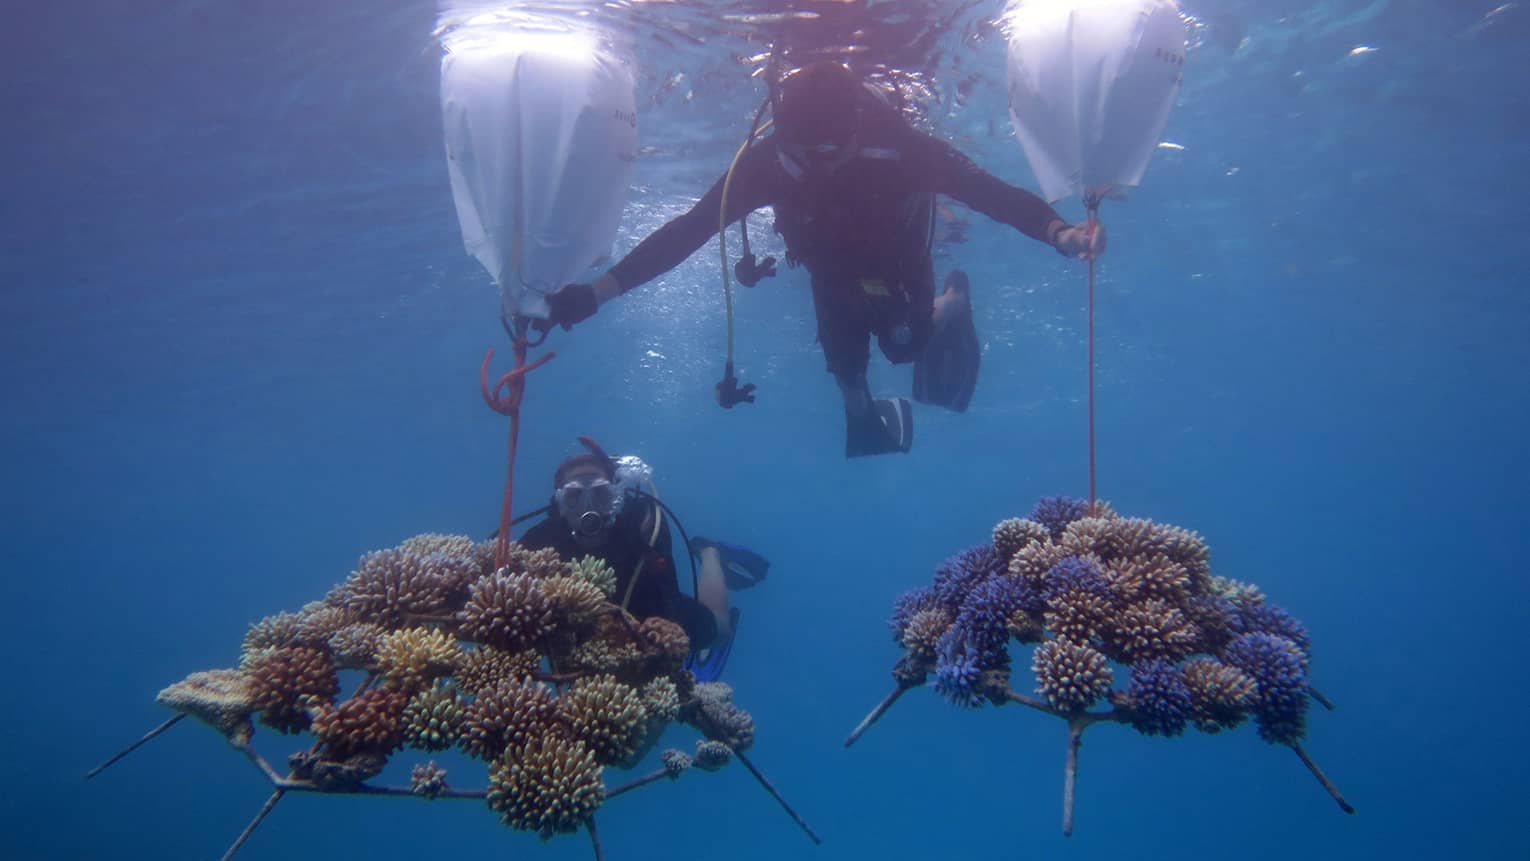 This image depicts two scuba divers in the waters near Four Seasons Resort Maldives at Kuda Huraa, transporting pieces of coral embedded onto coral frames. This image connects to ESG and preserving biodiversity at Four Seasons.